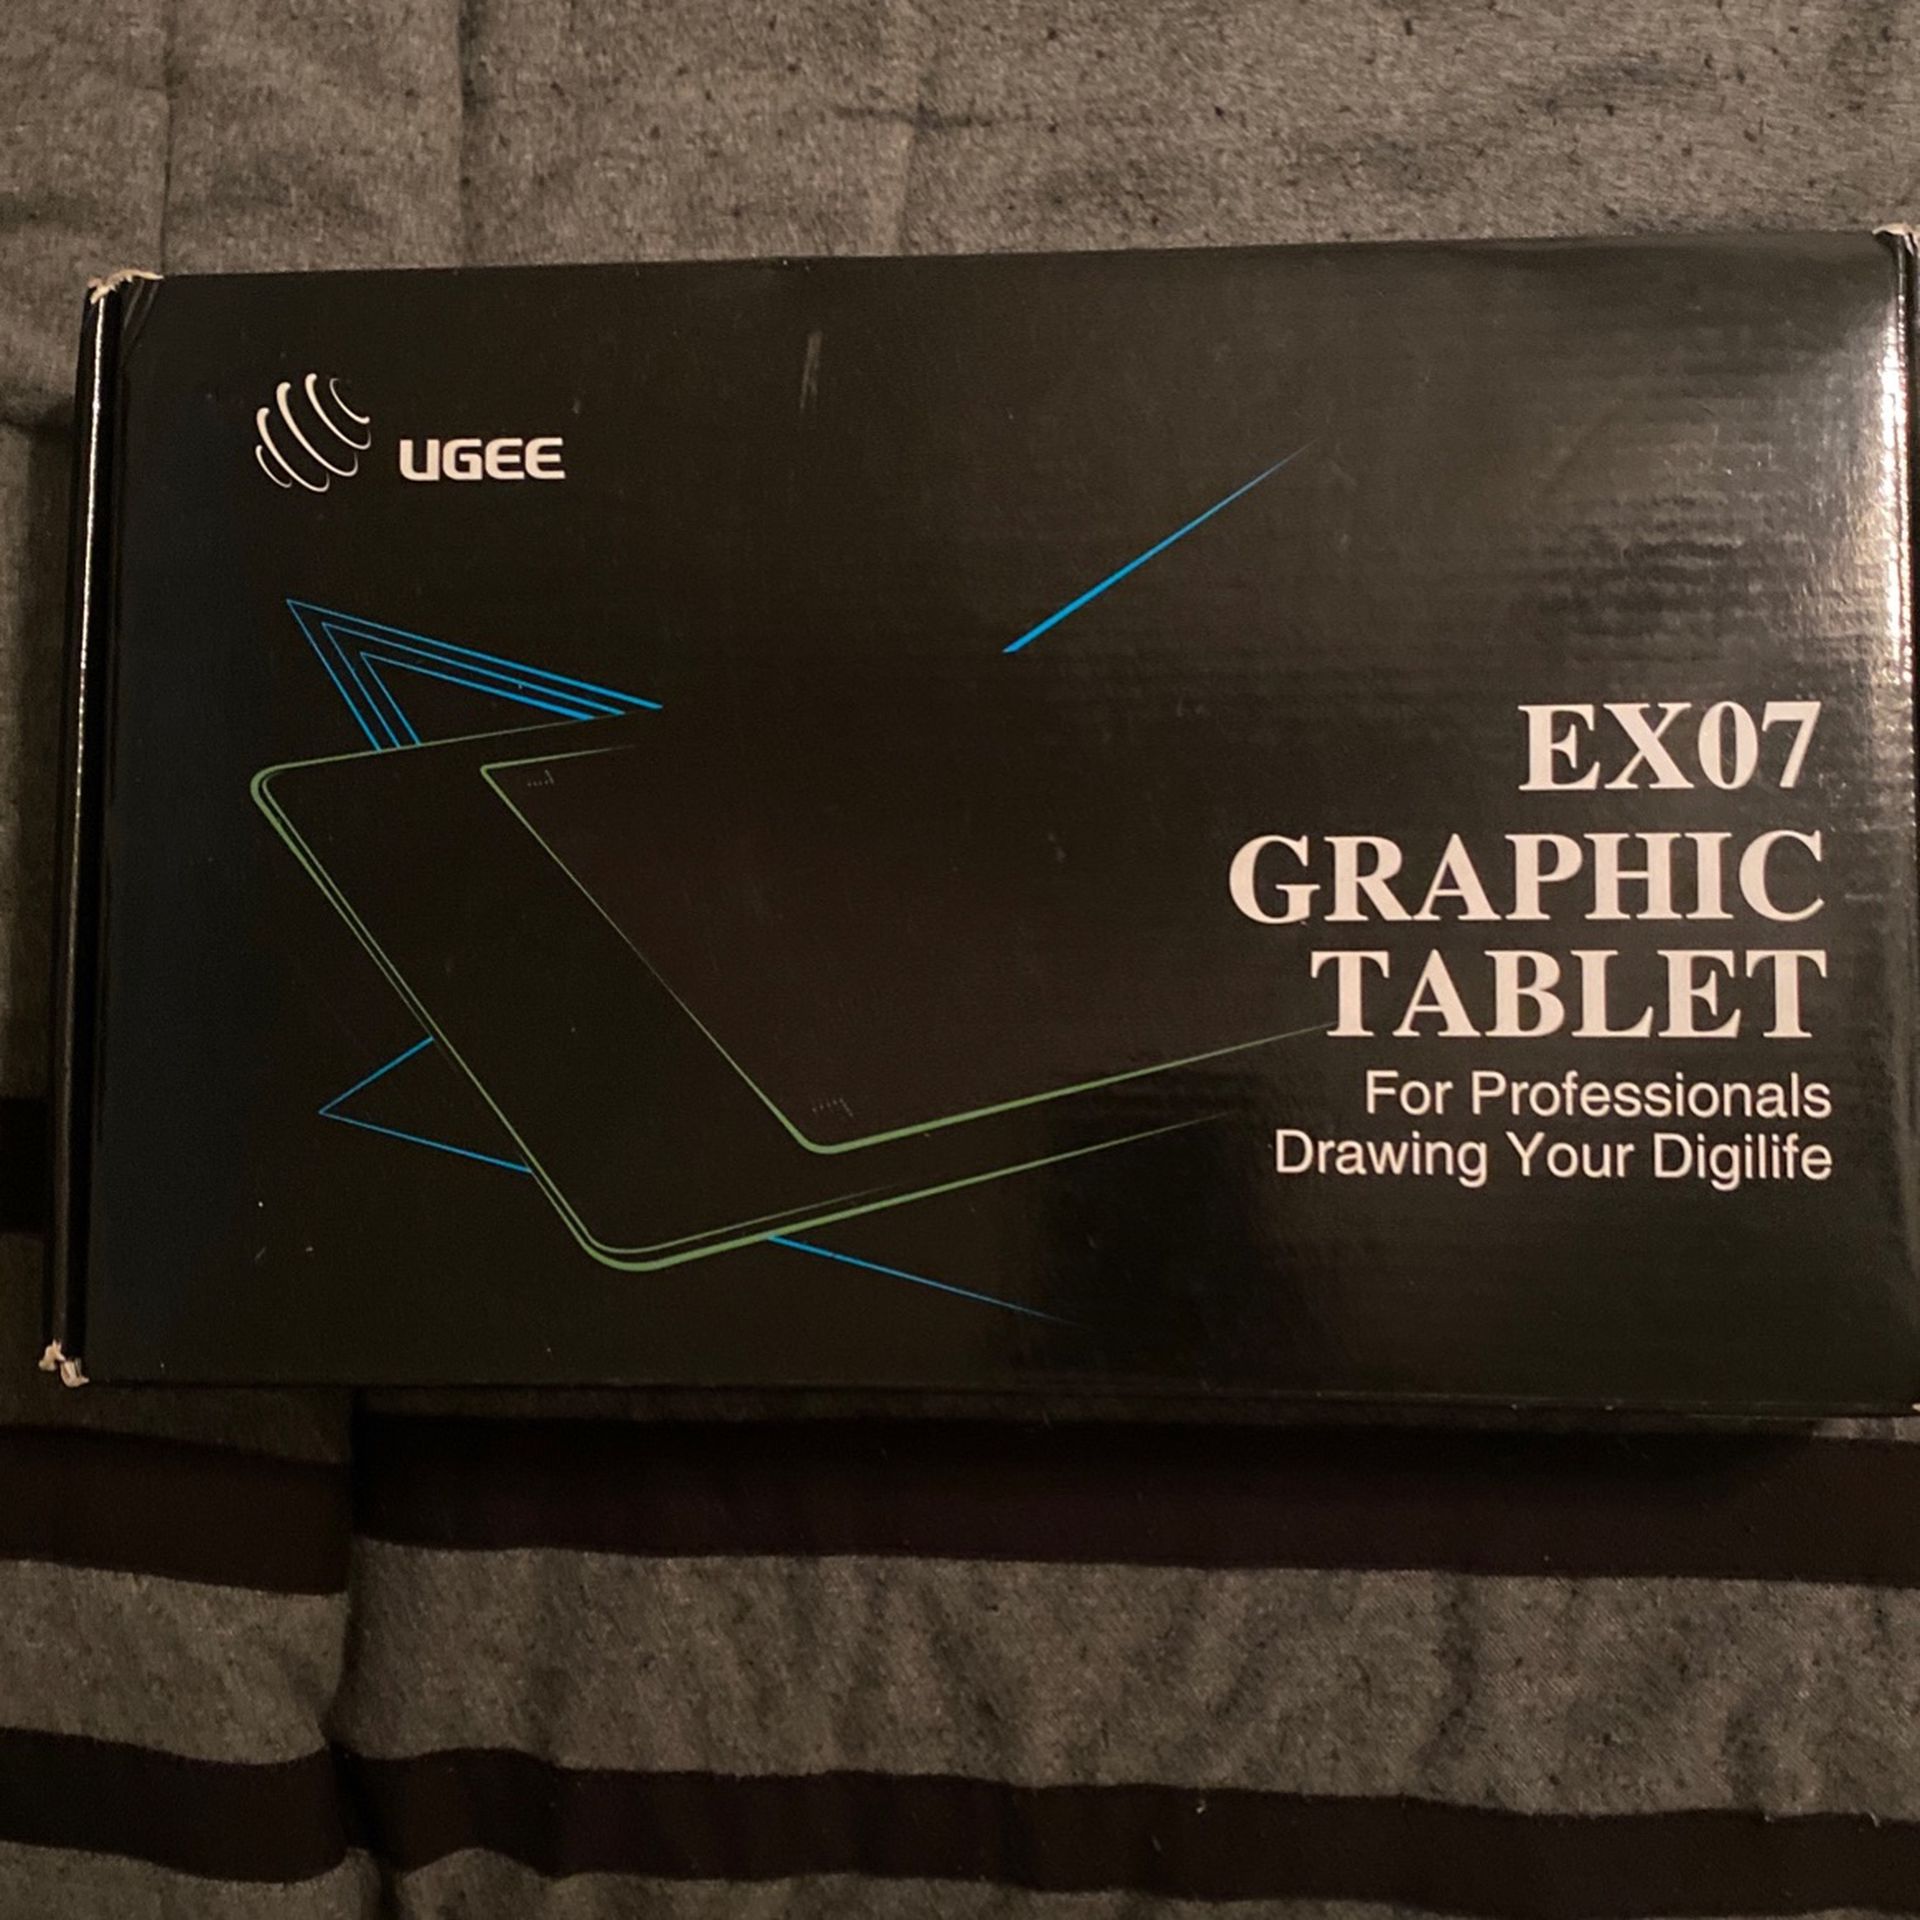 EX07 Graphic Tablet